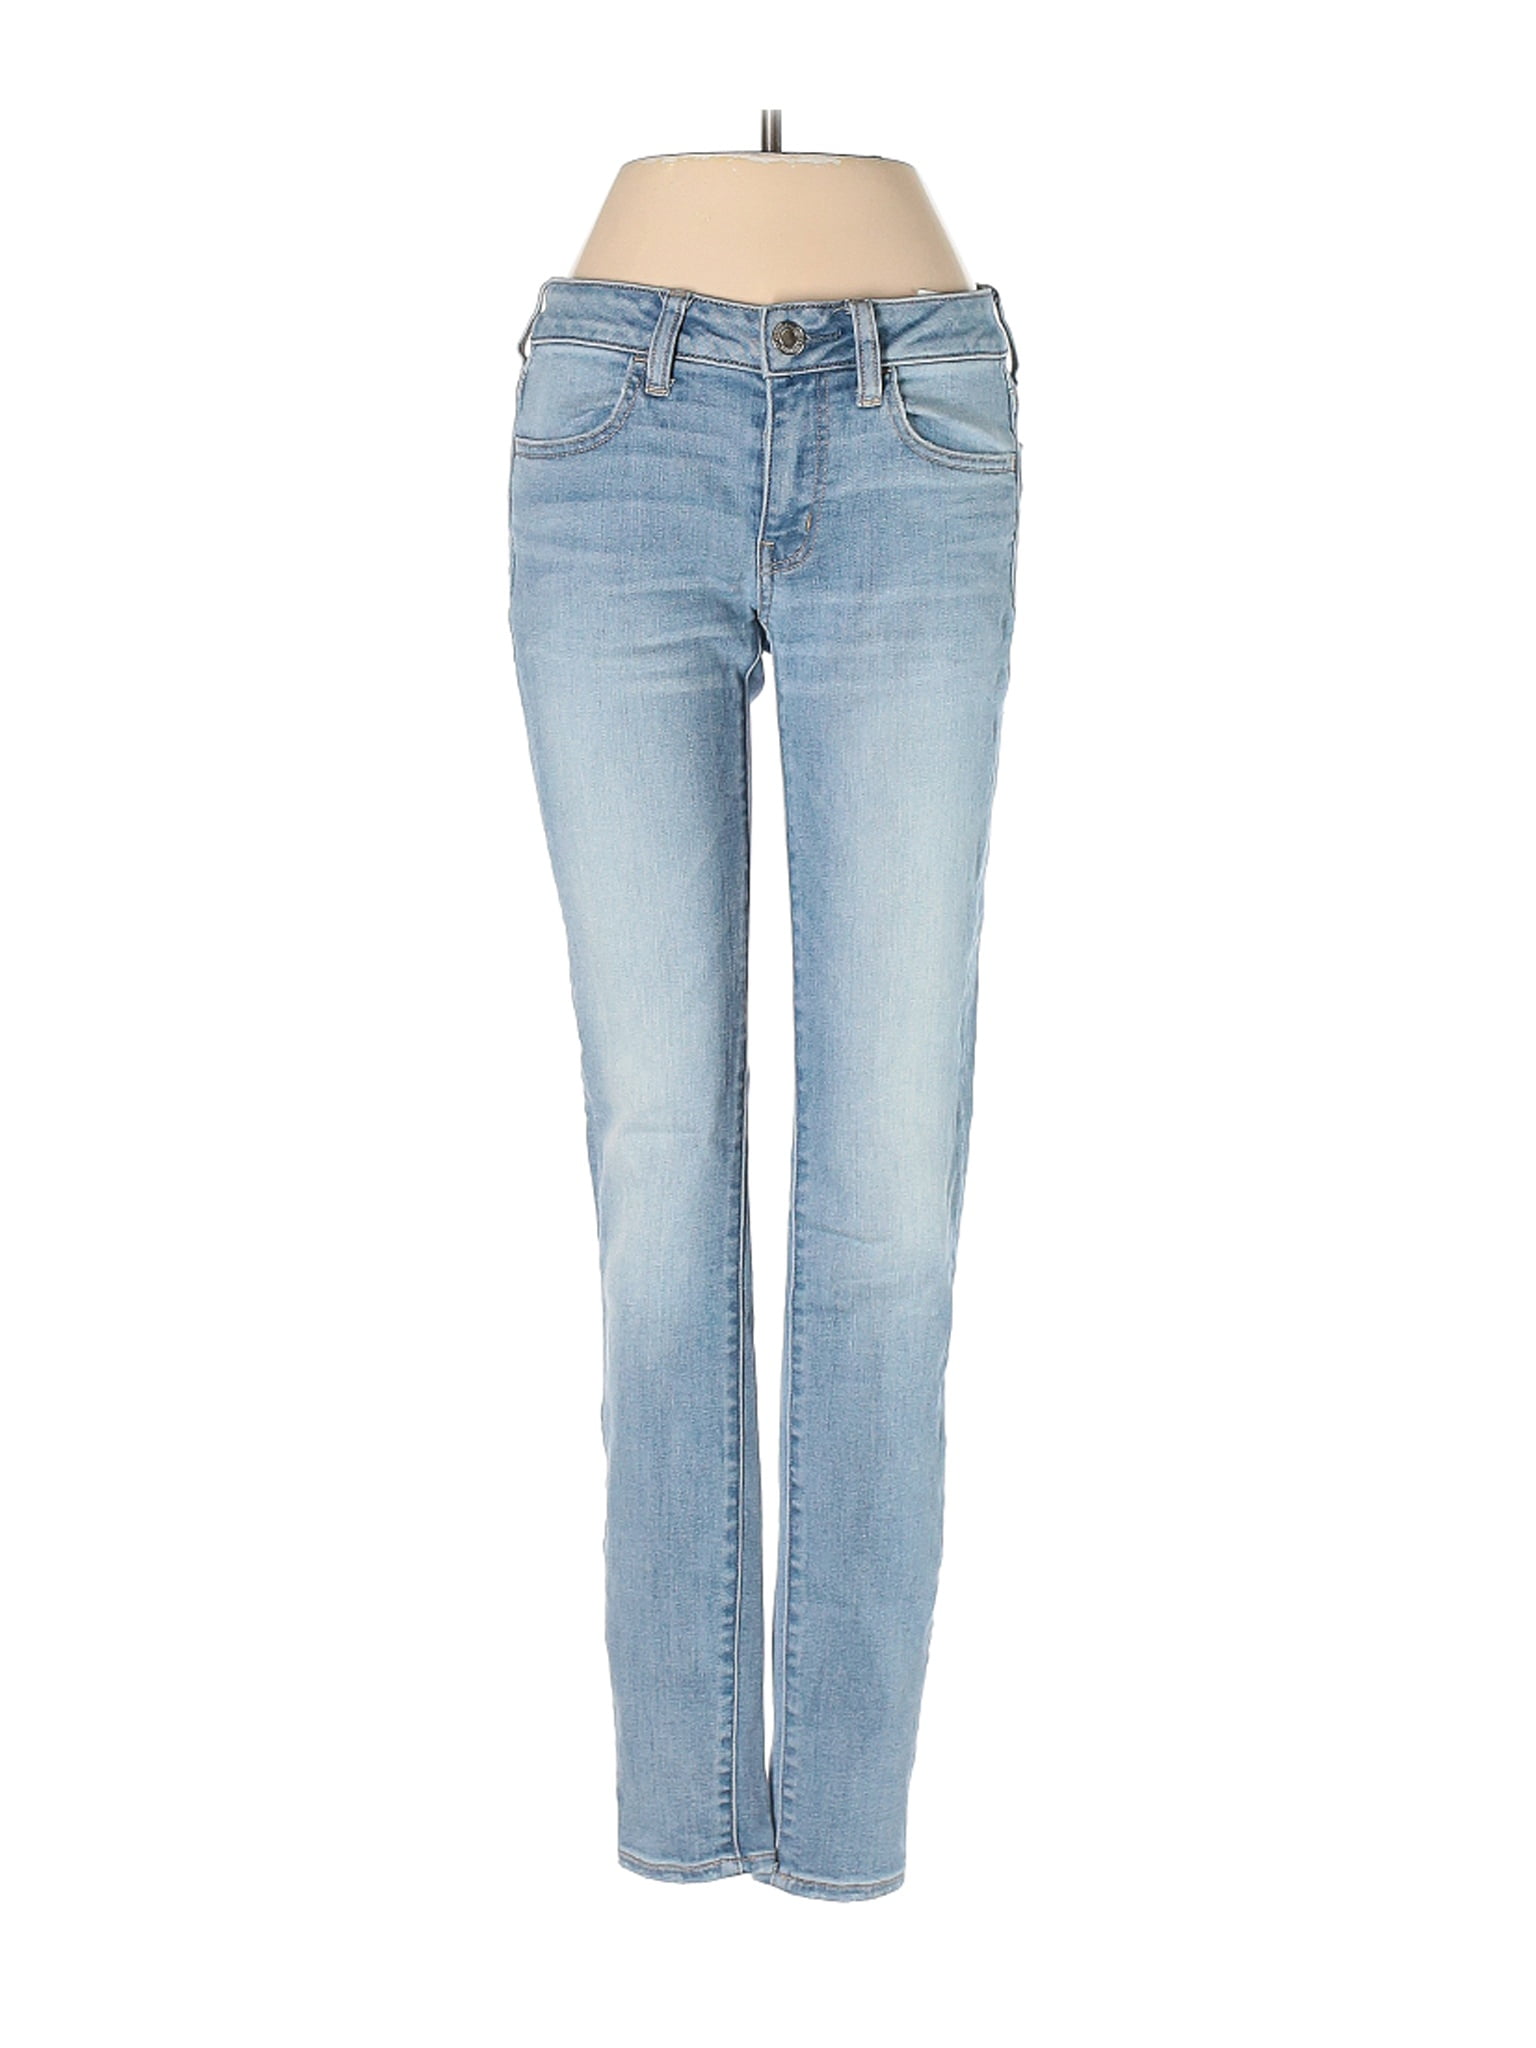 american eagle women's tall jeans